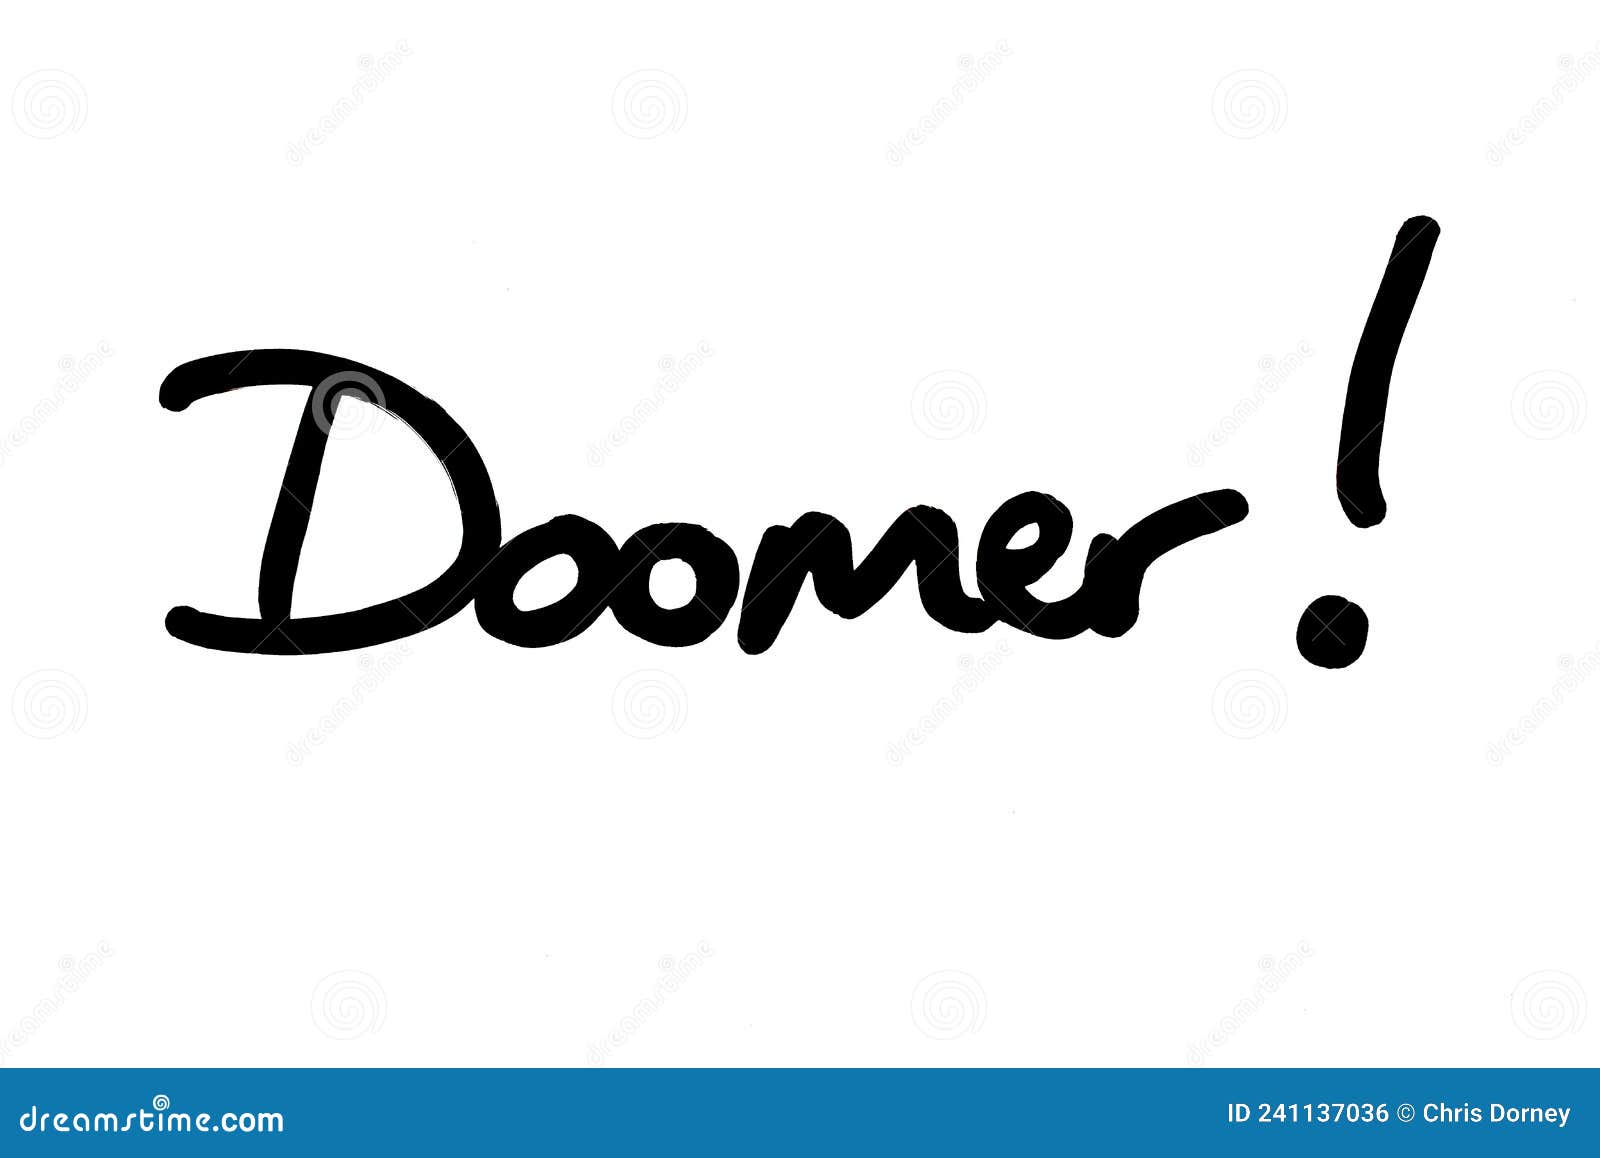 Doomer Royalty-Free Images, Stock Photos & Pictures